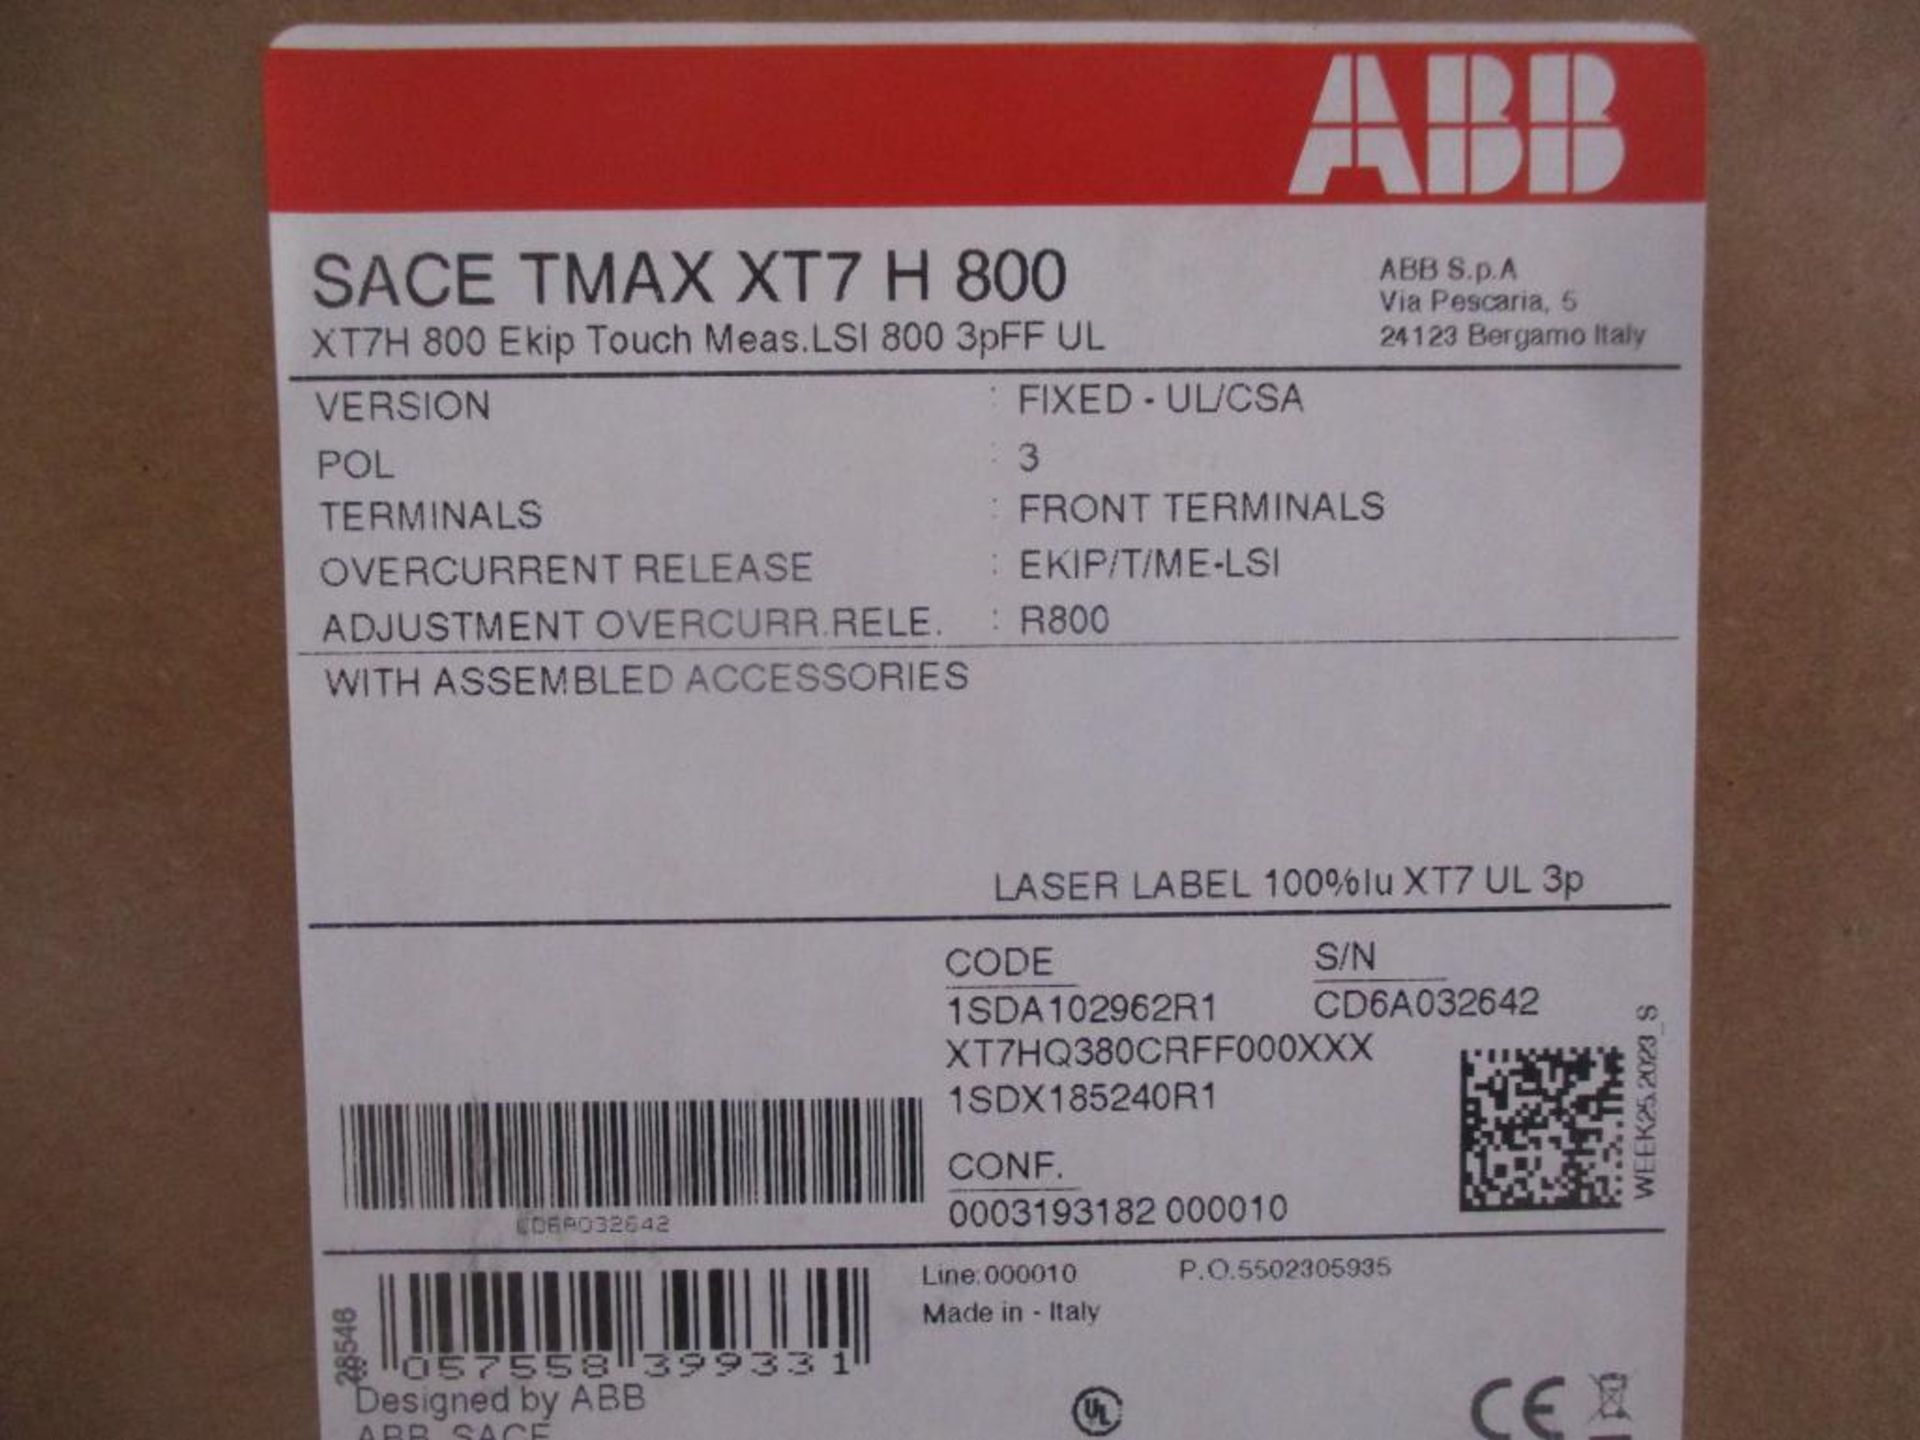 ABB 800 AMP Circuit Breaker, SACE TMAX XT7 H 800, EKIP Touch Measuring LSI 3 Pole (New in Box) - Image 4 of 4